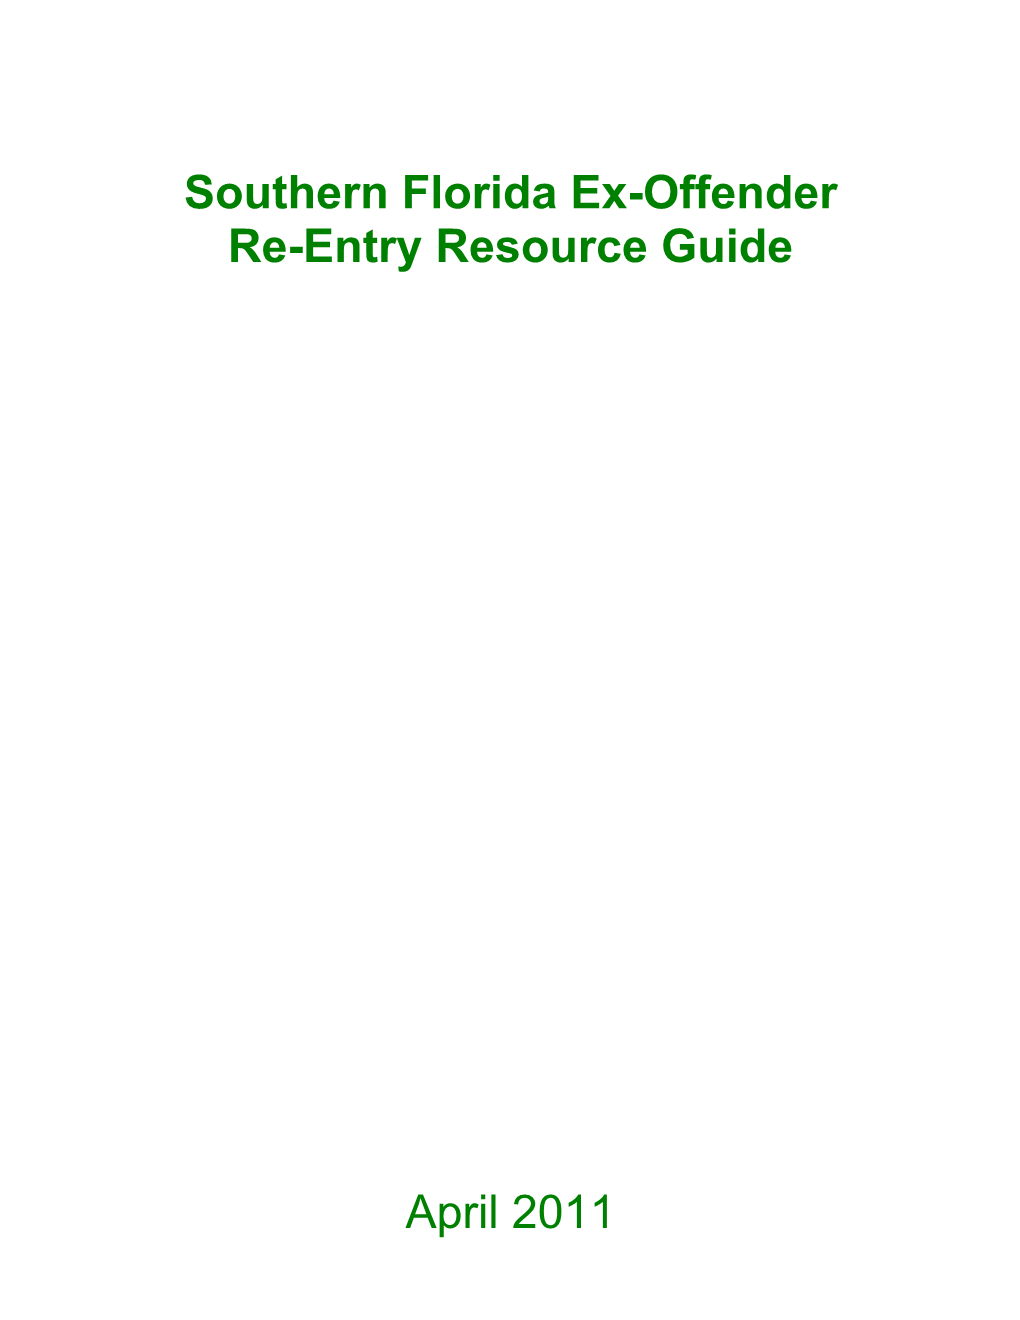 Southern Florida Re-Entry Resource Guide